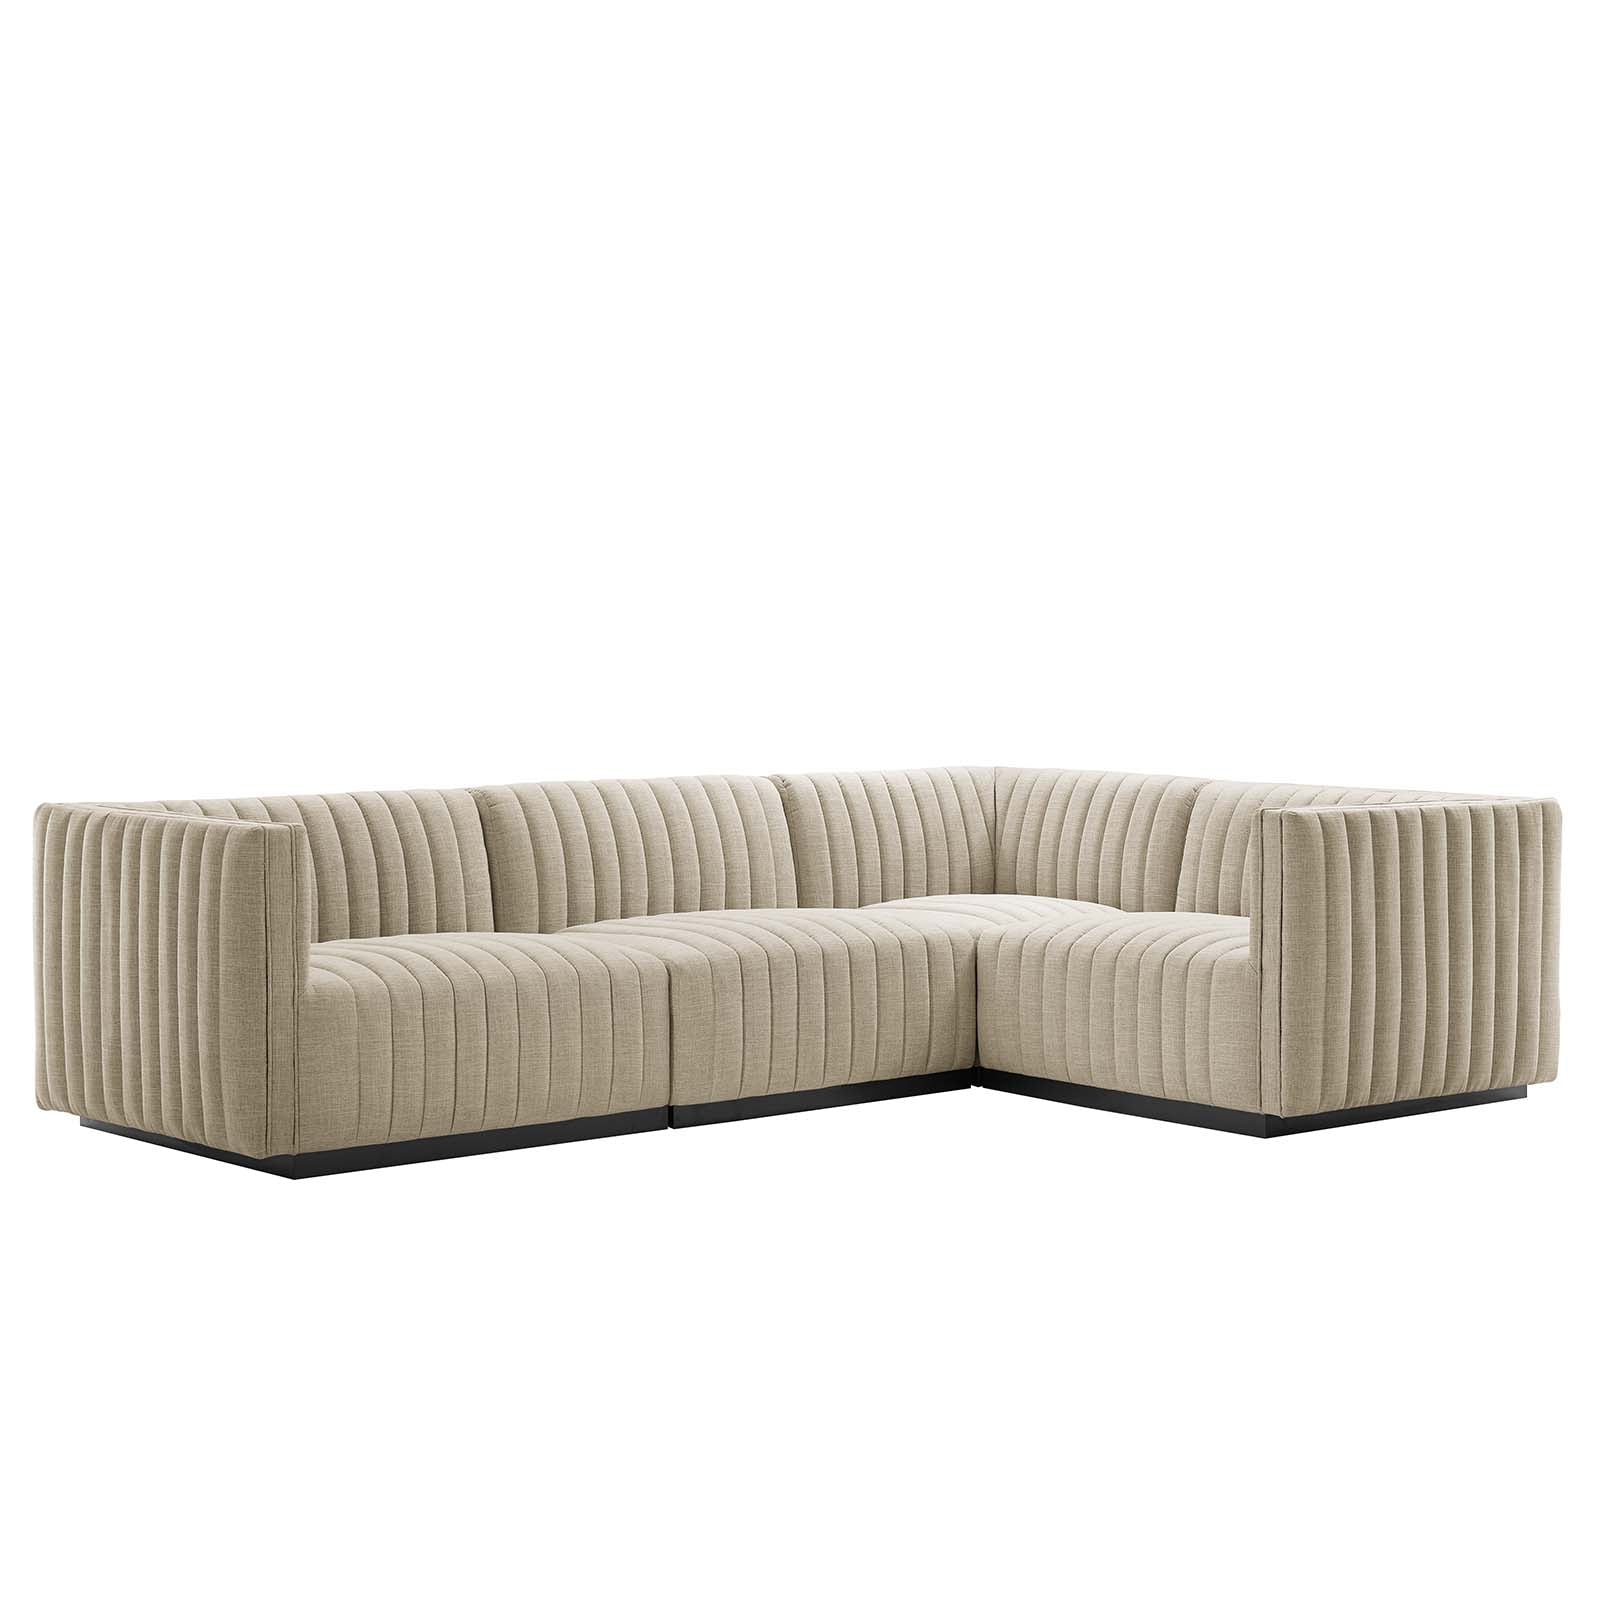 Modway Sectional Sofas - Conjure Channel Tufted Upholstered Fabric 4-Piece L-Shaped Sectional Black Beige